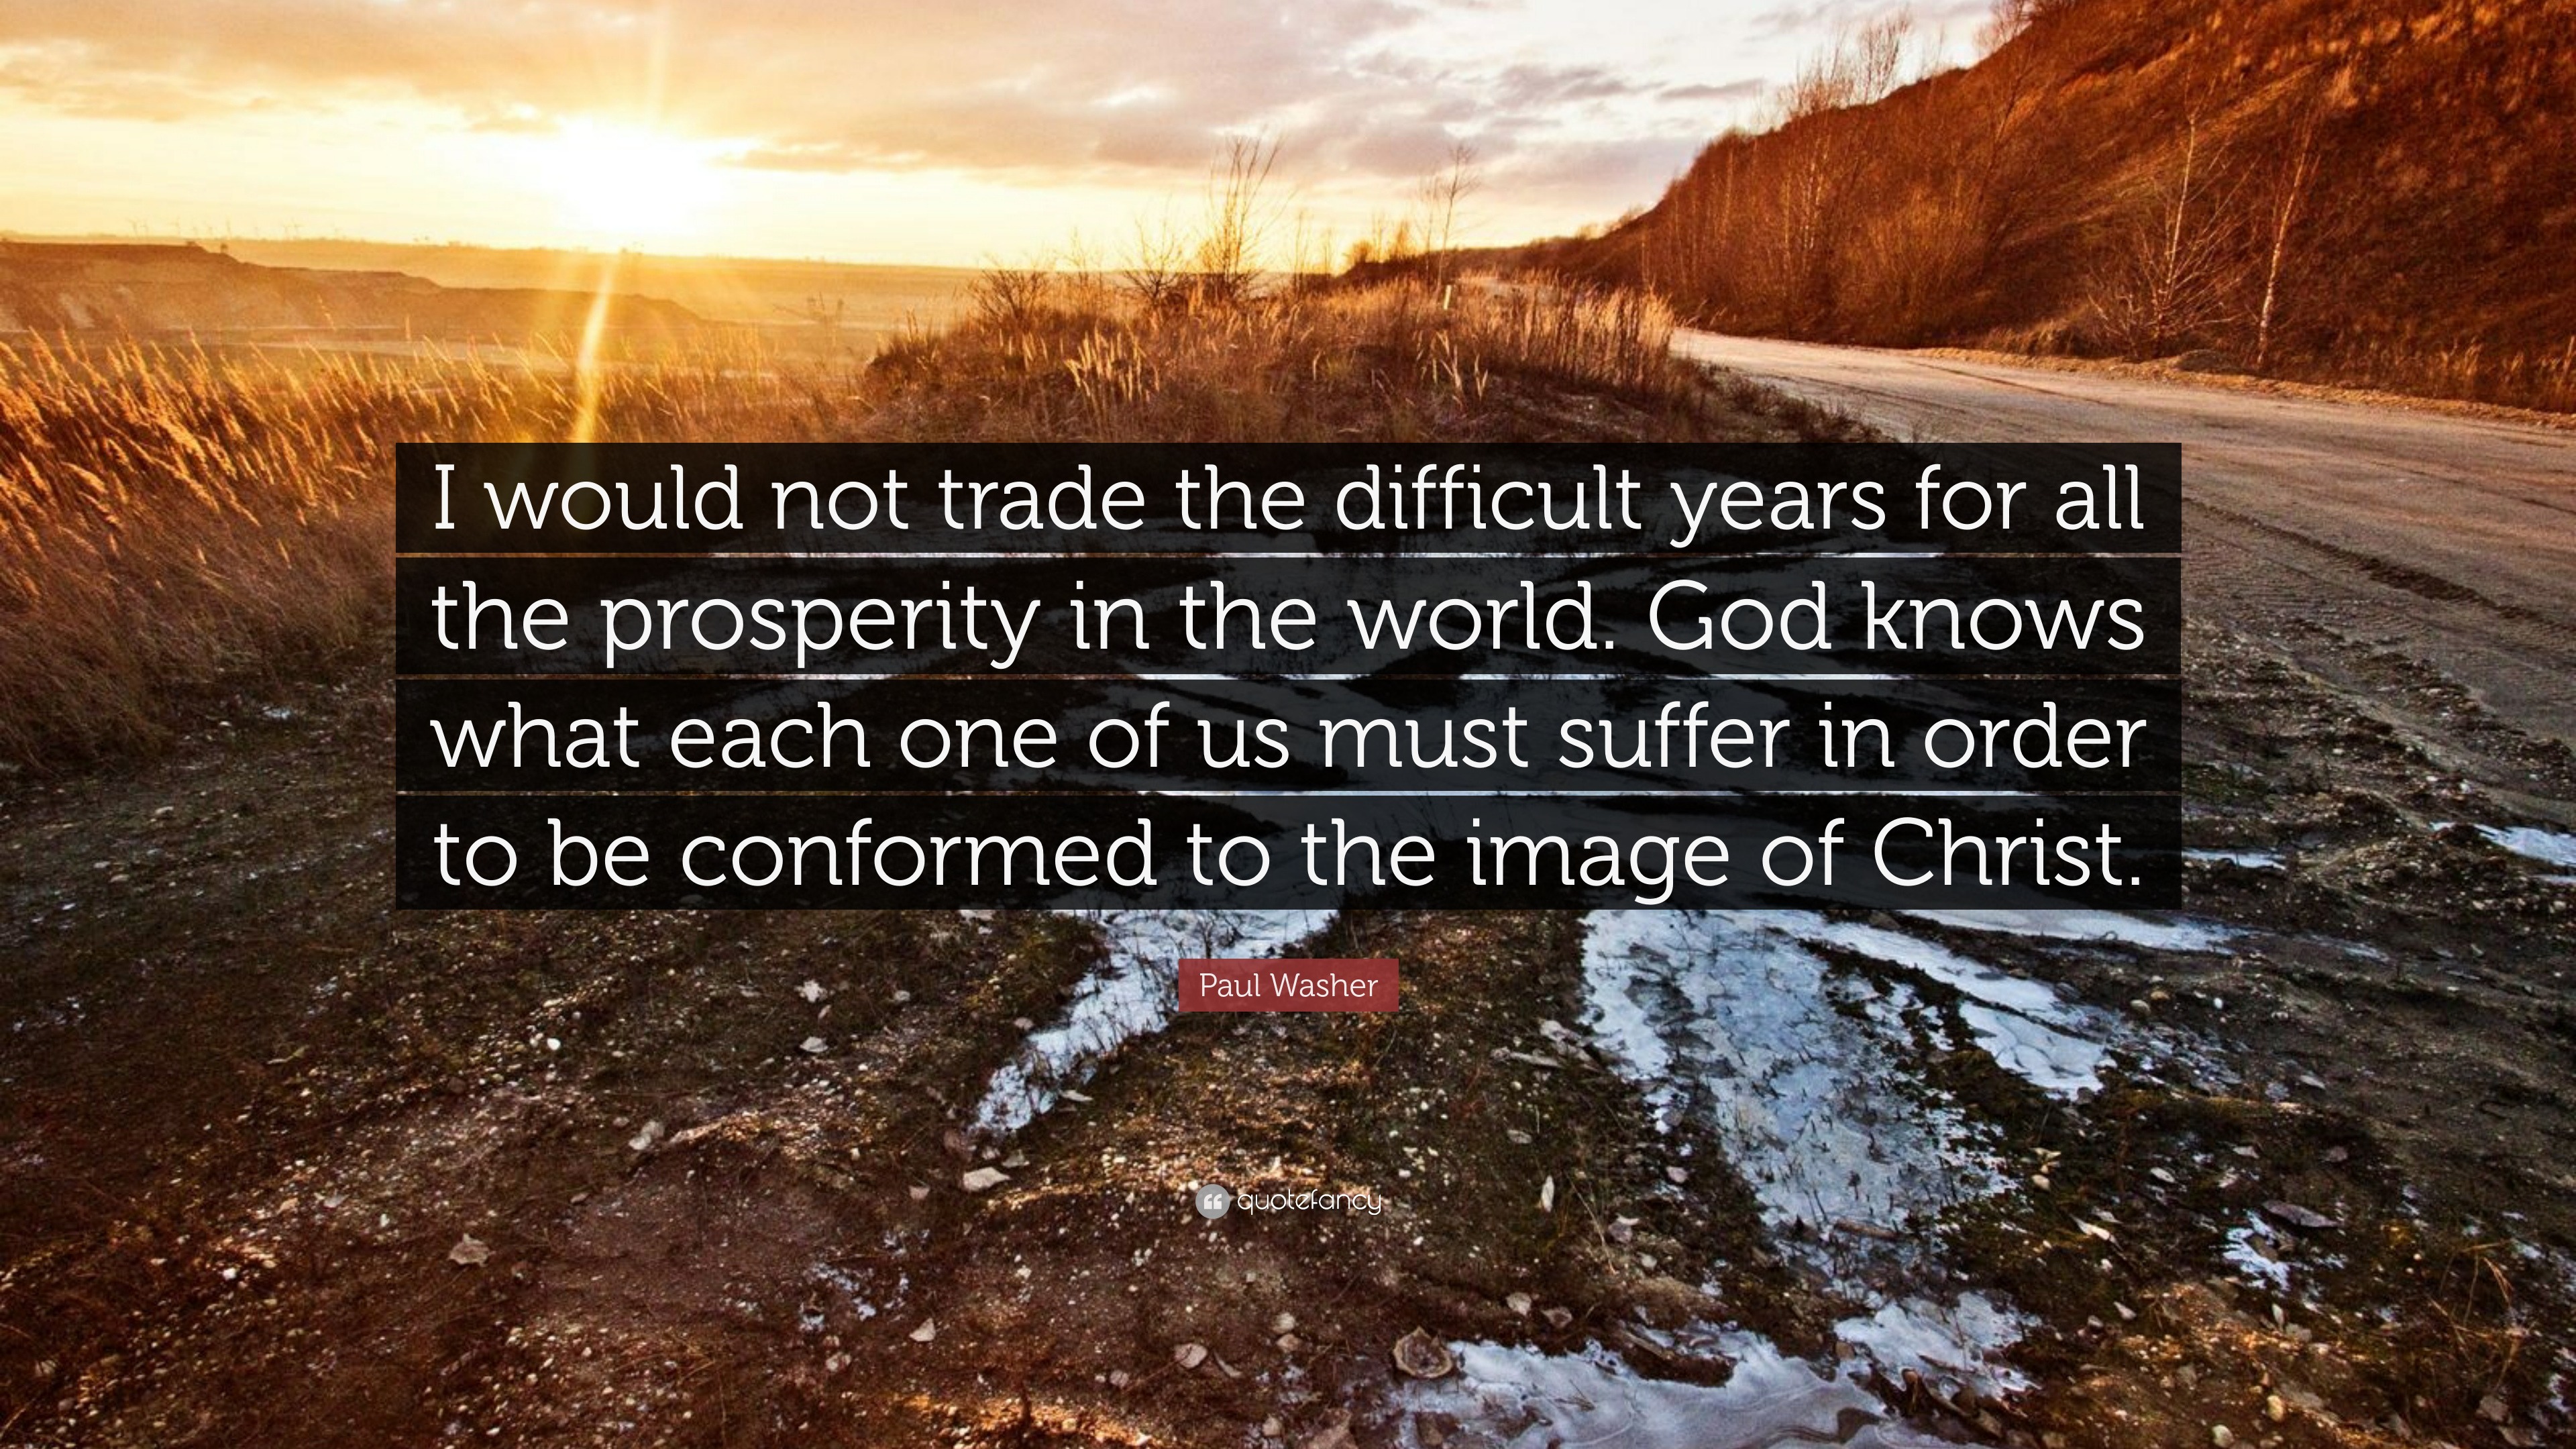 Paul Washer Quote: “I would not trade the difficult years for all the ...